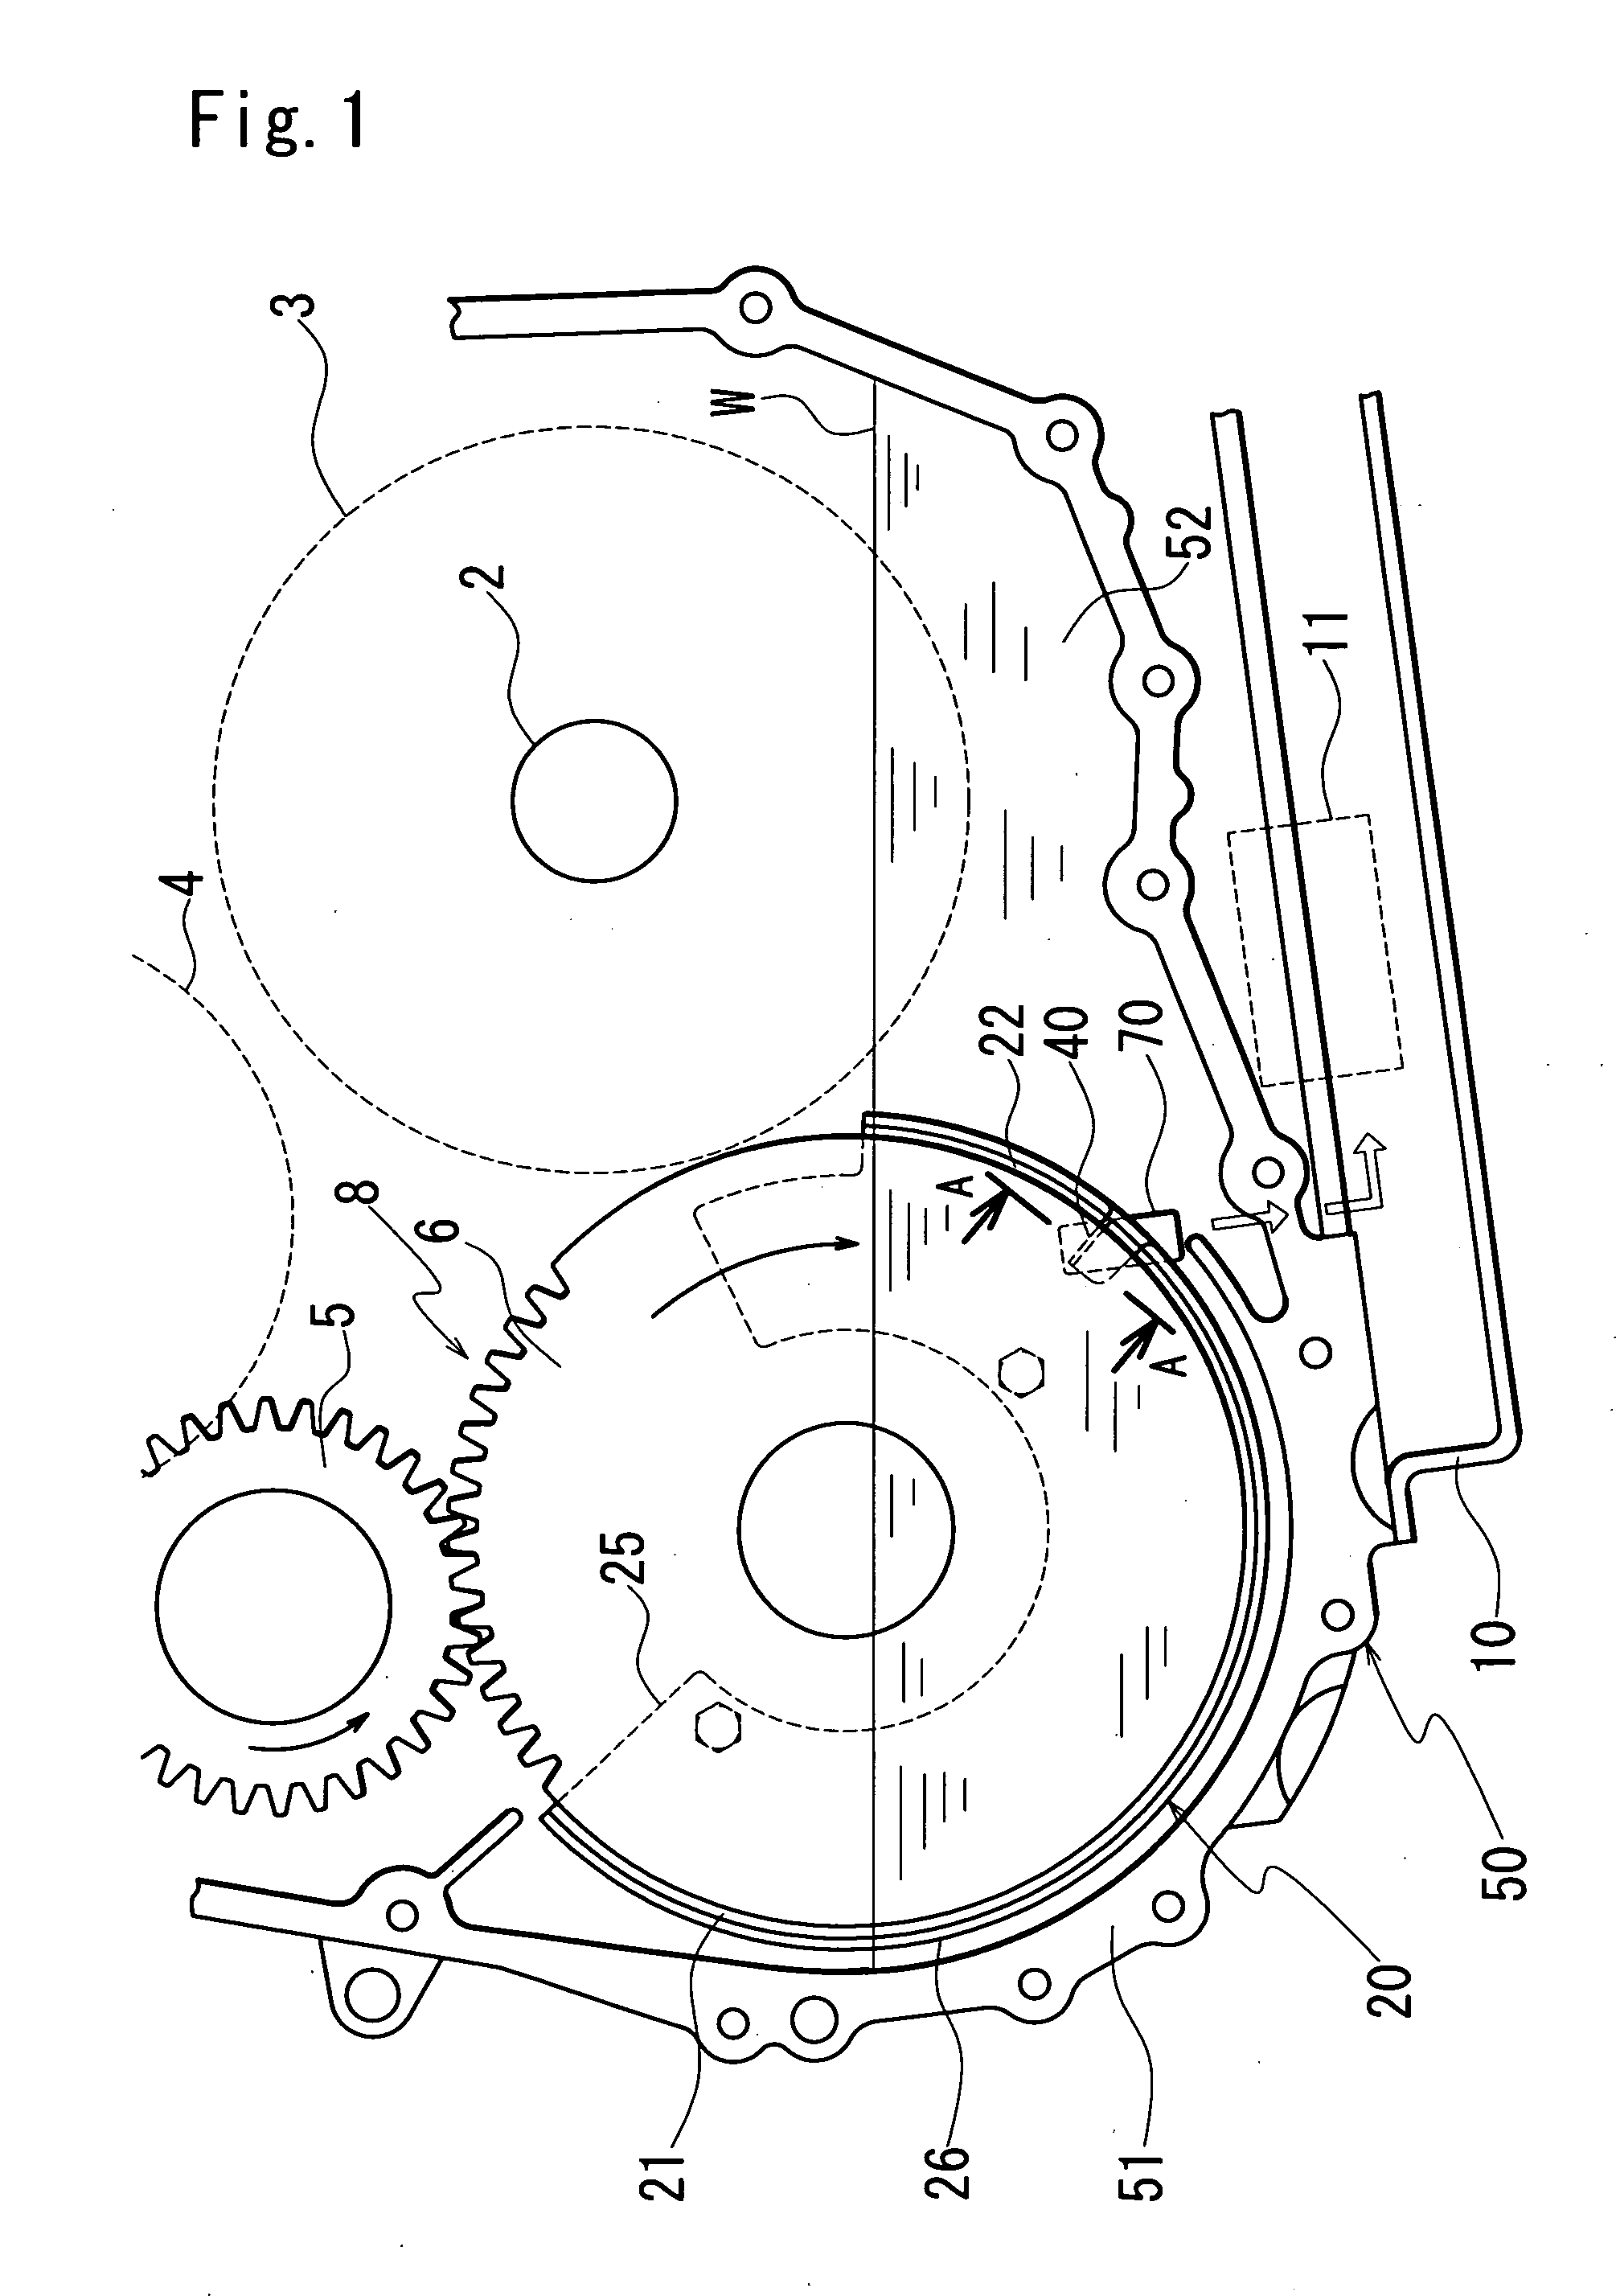 Oil discharge structure of baffle plate